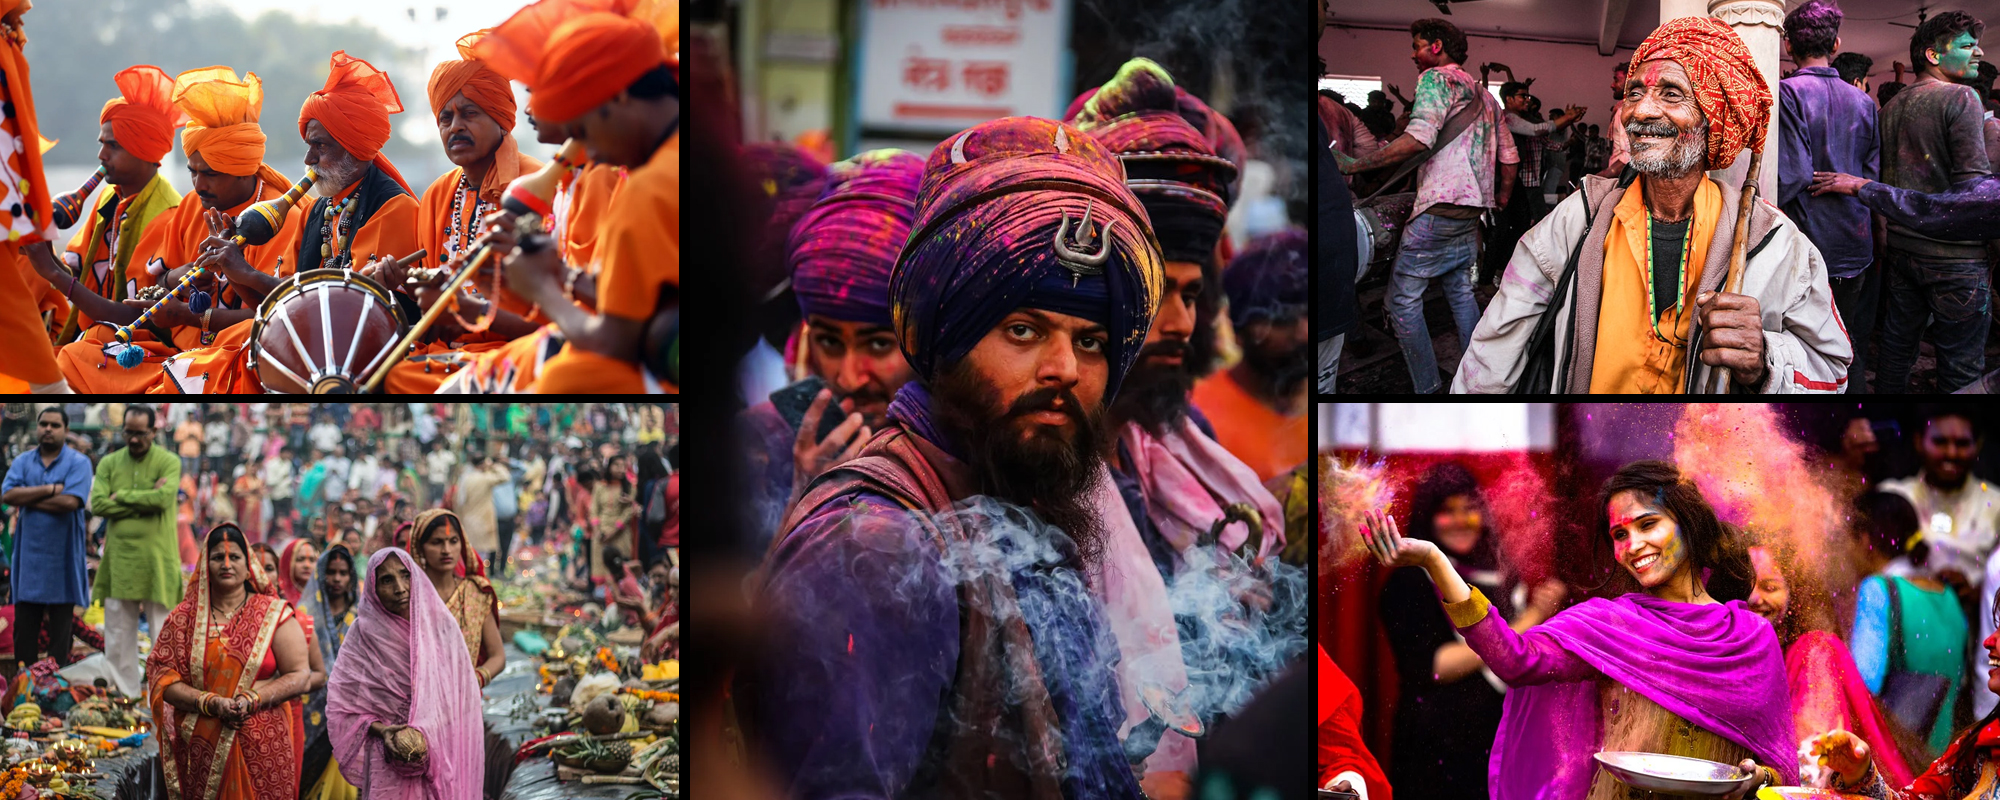 The Colourful Indian Festivals of Holi and Diwali